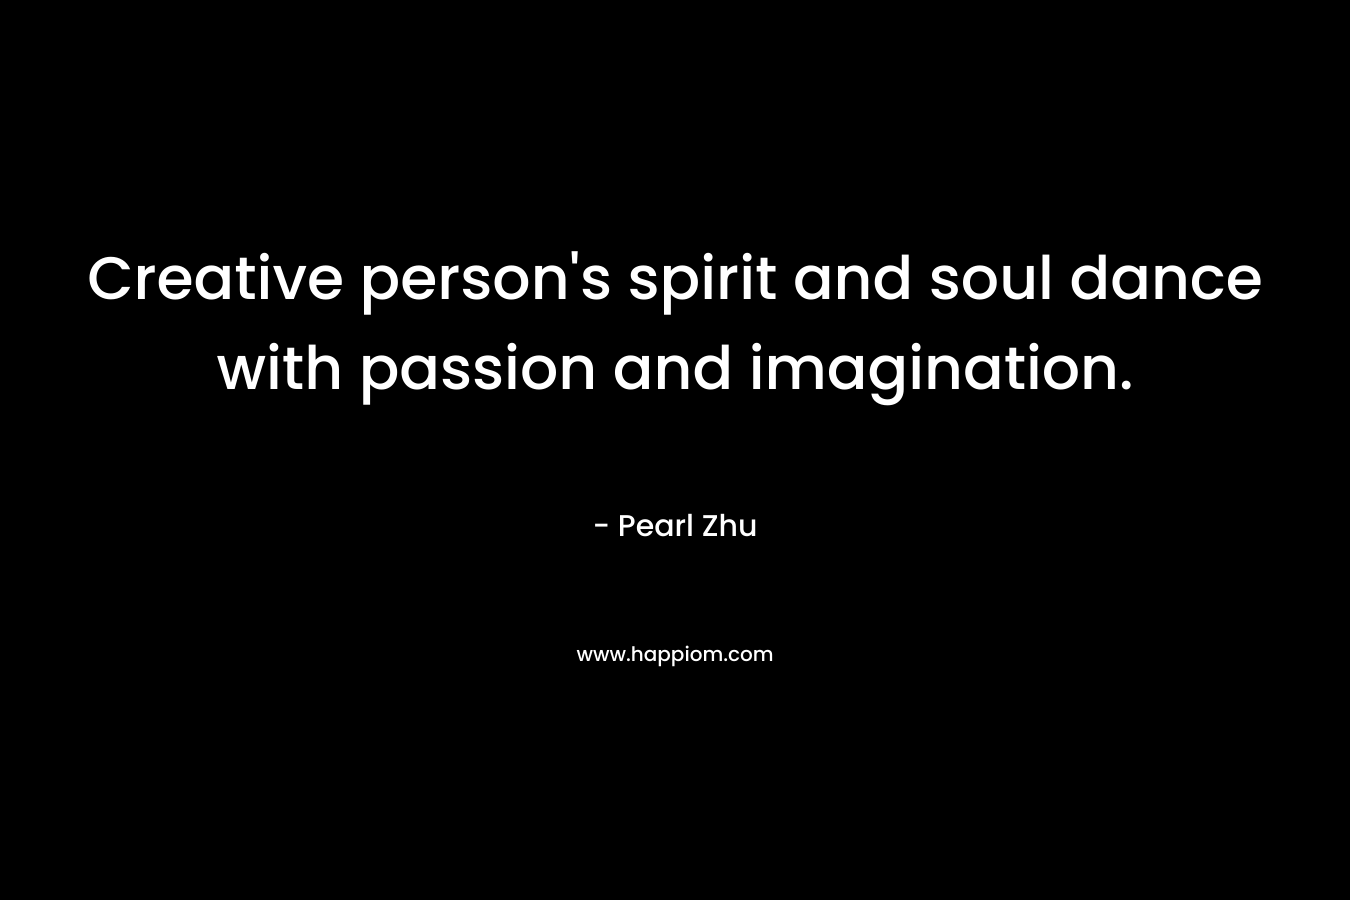 Creative person's spirit and soul dance with passion and imagination.